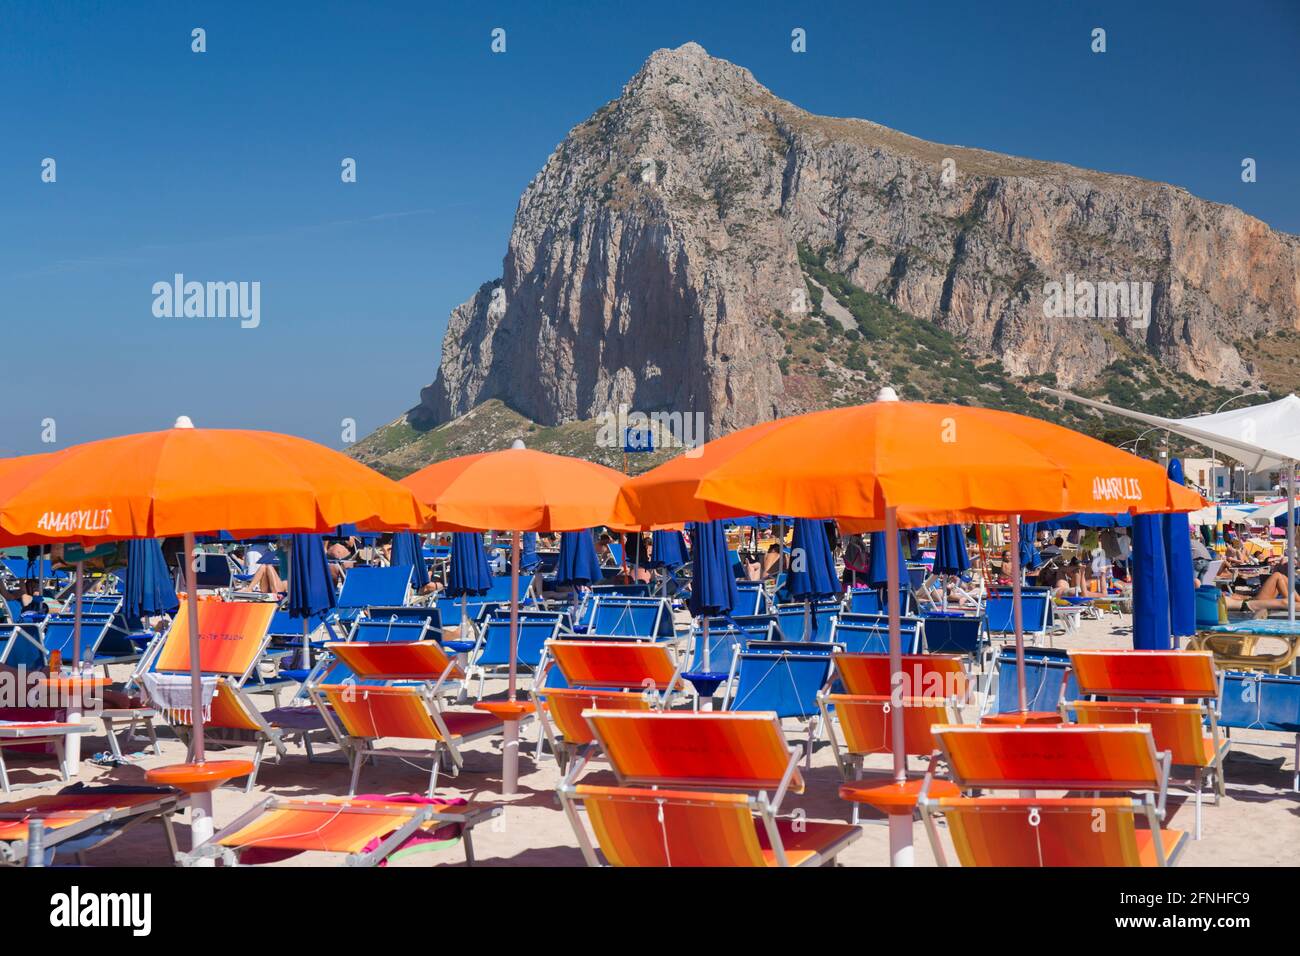 San Vito Lo Capo, Trapani, Sicily, Italy. View along crowded shore to the towering north face of Monte Monaco, striking beach furniture in foreground. Stock Photo